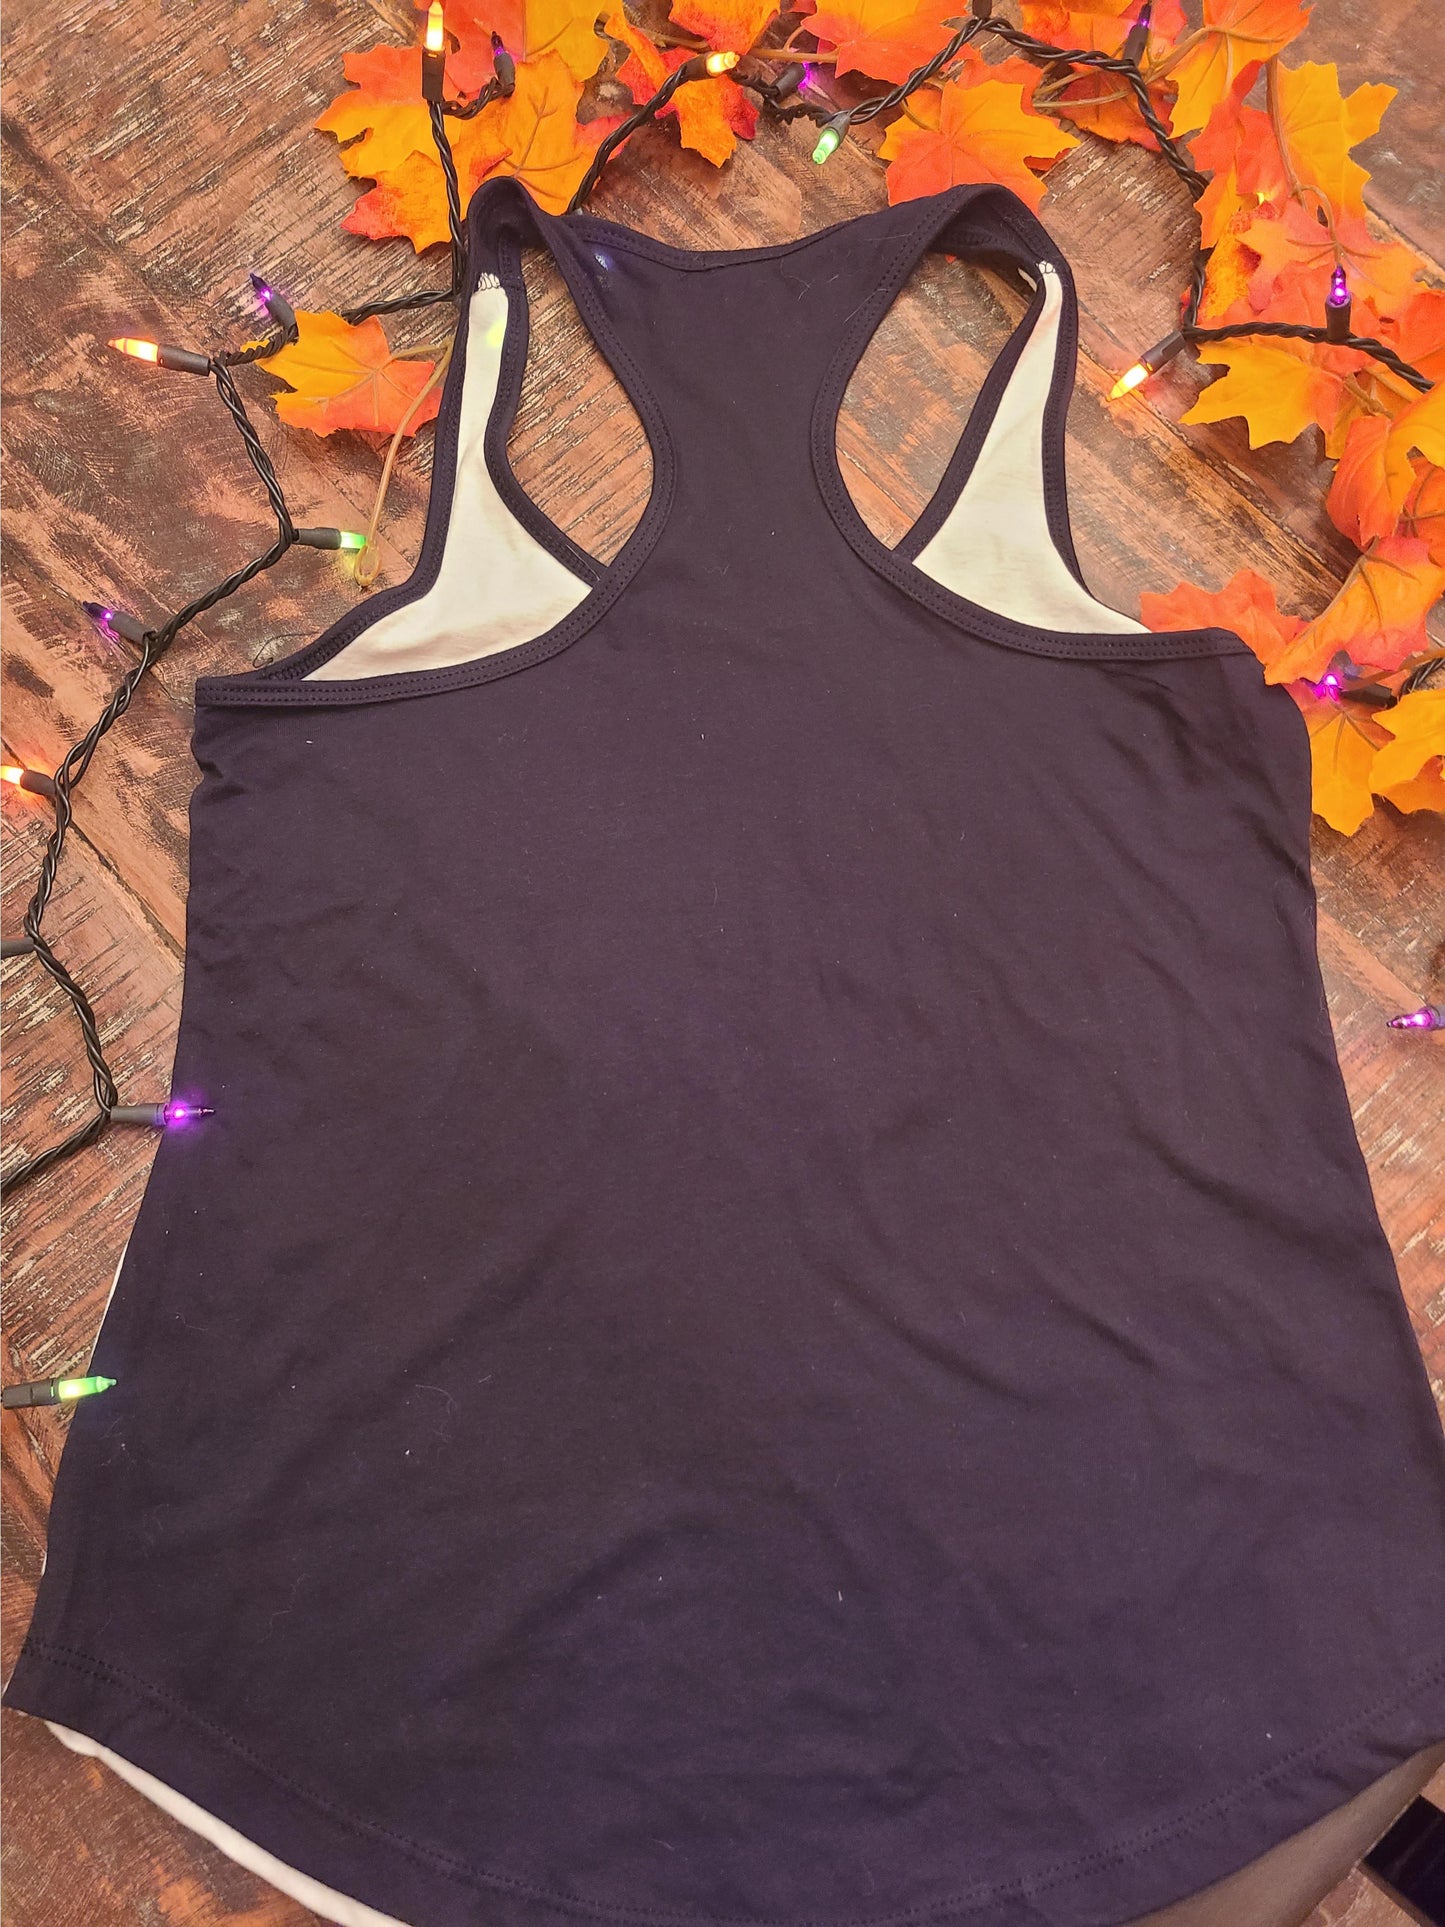 Be a Perky Witch Ringer Style Racerback Tank Top - Perky Nerd Tank